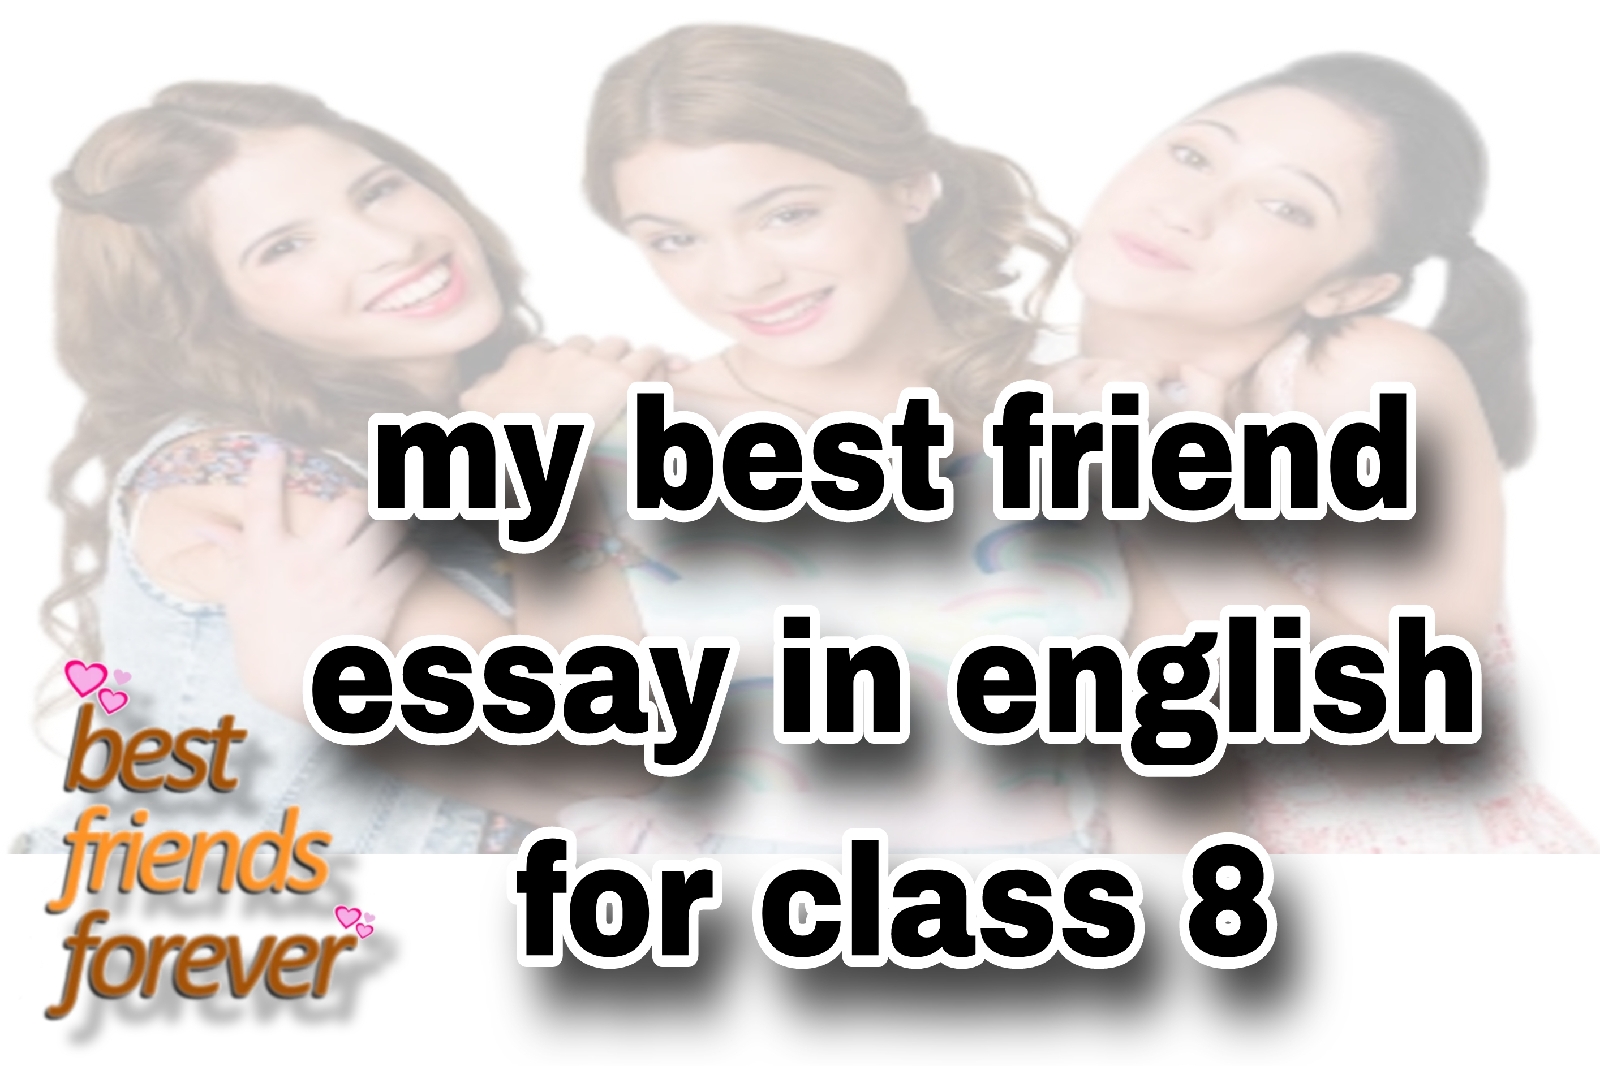 my best friend essay in english for class 8